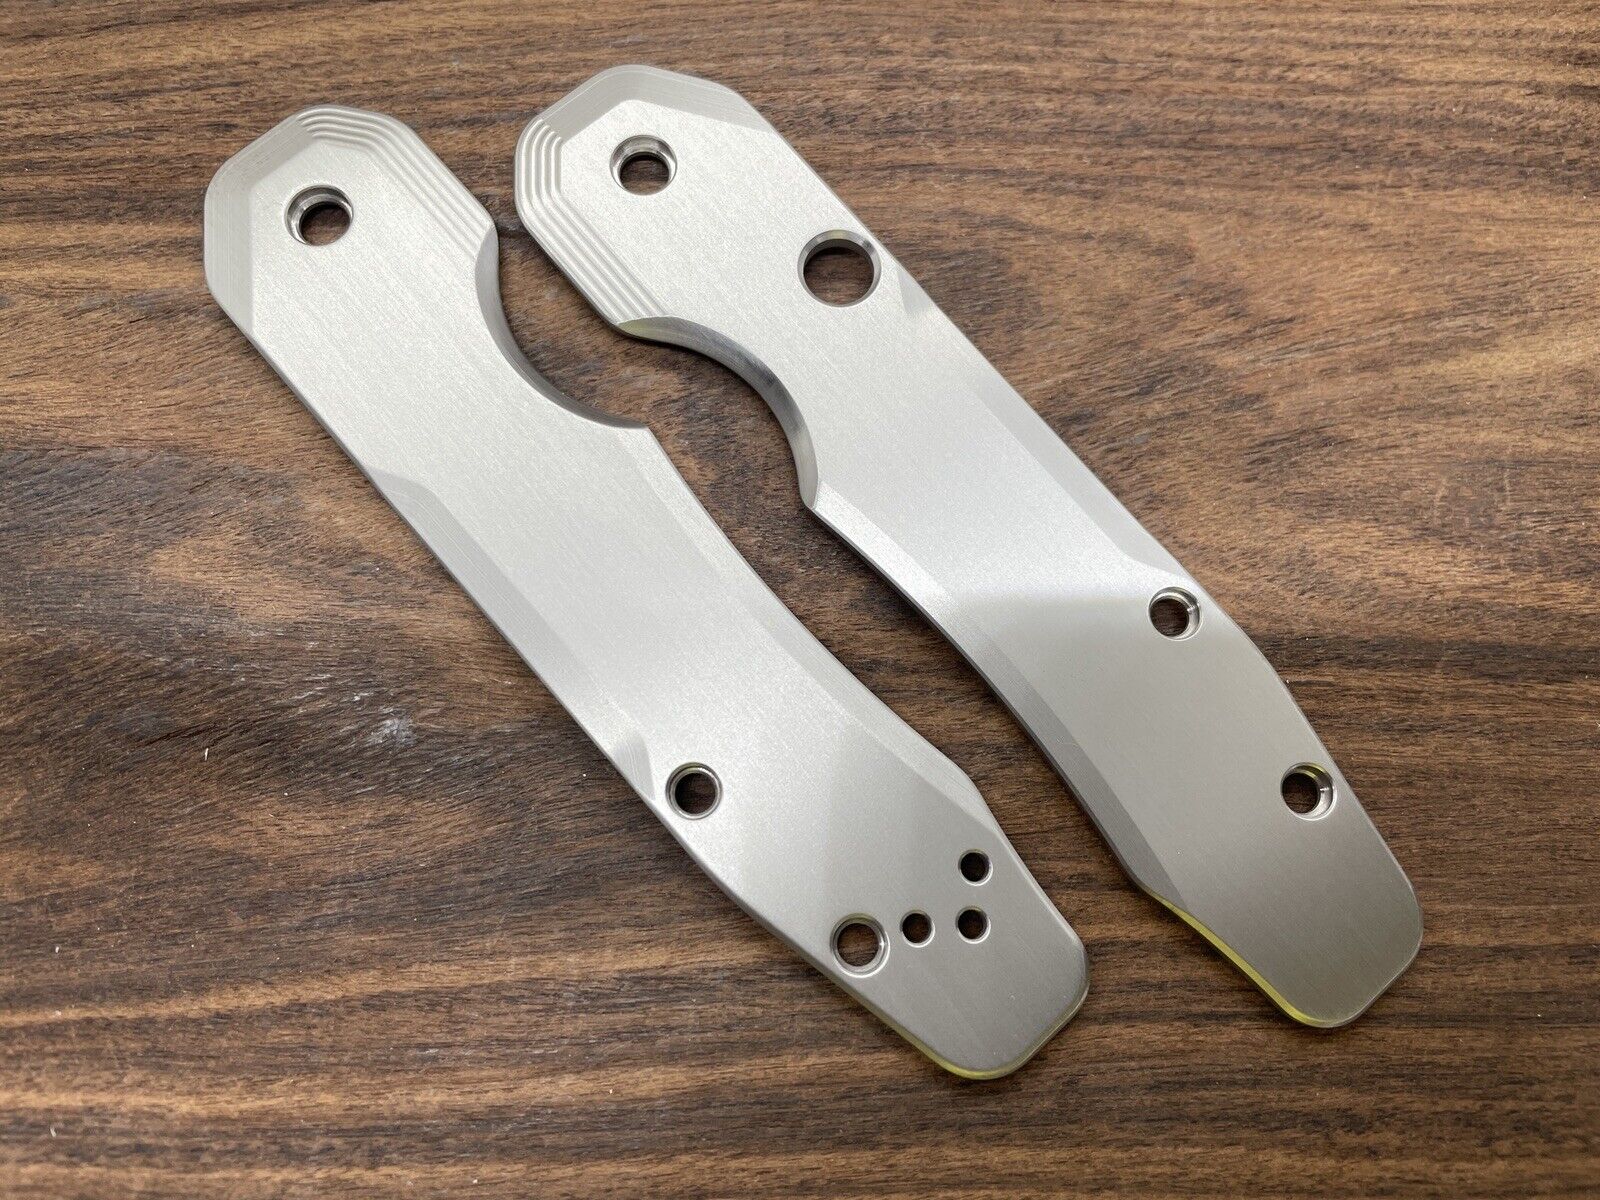 Brushed Titanium Knife Scales for SMOCK Spyderco Folding Knife Made in USA